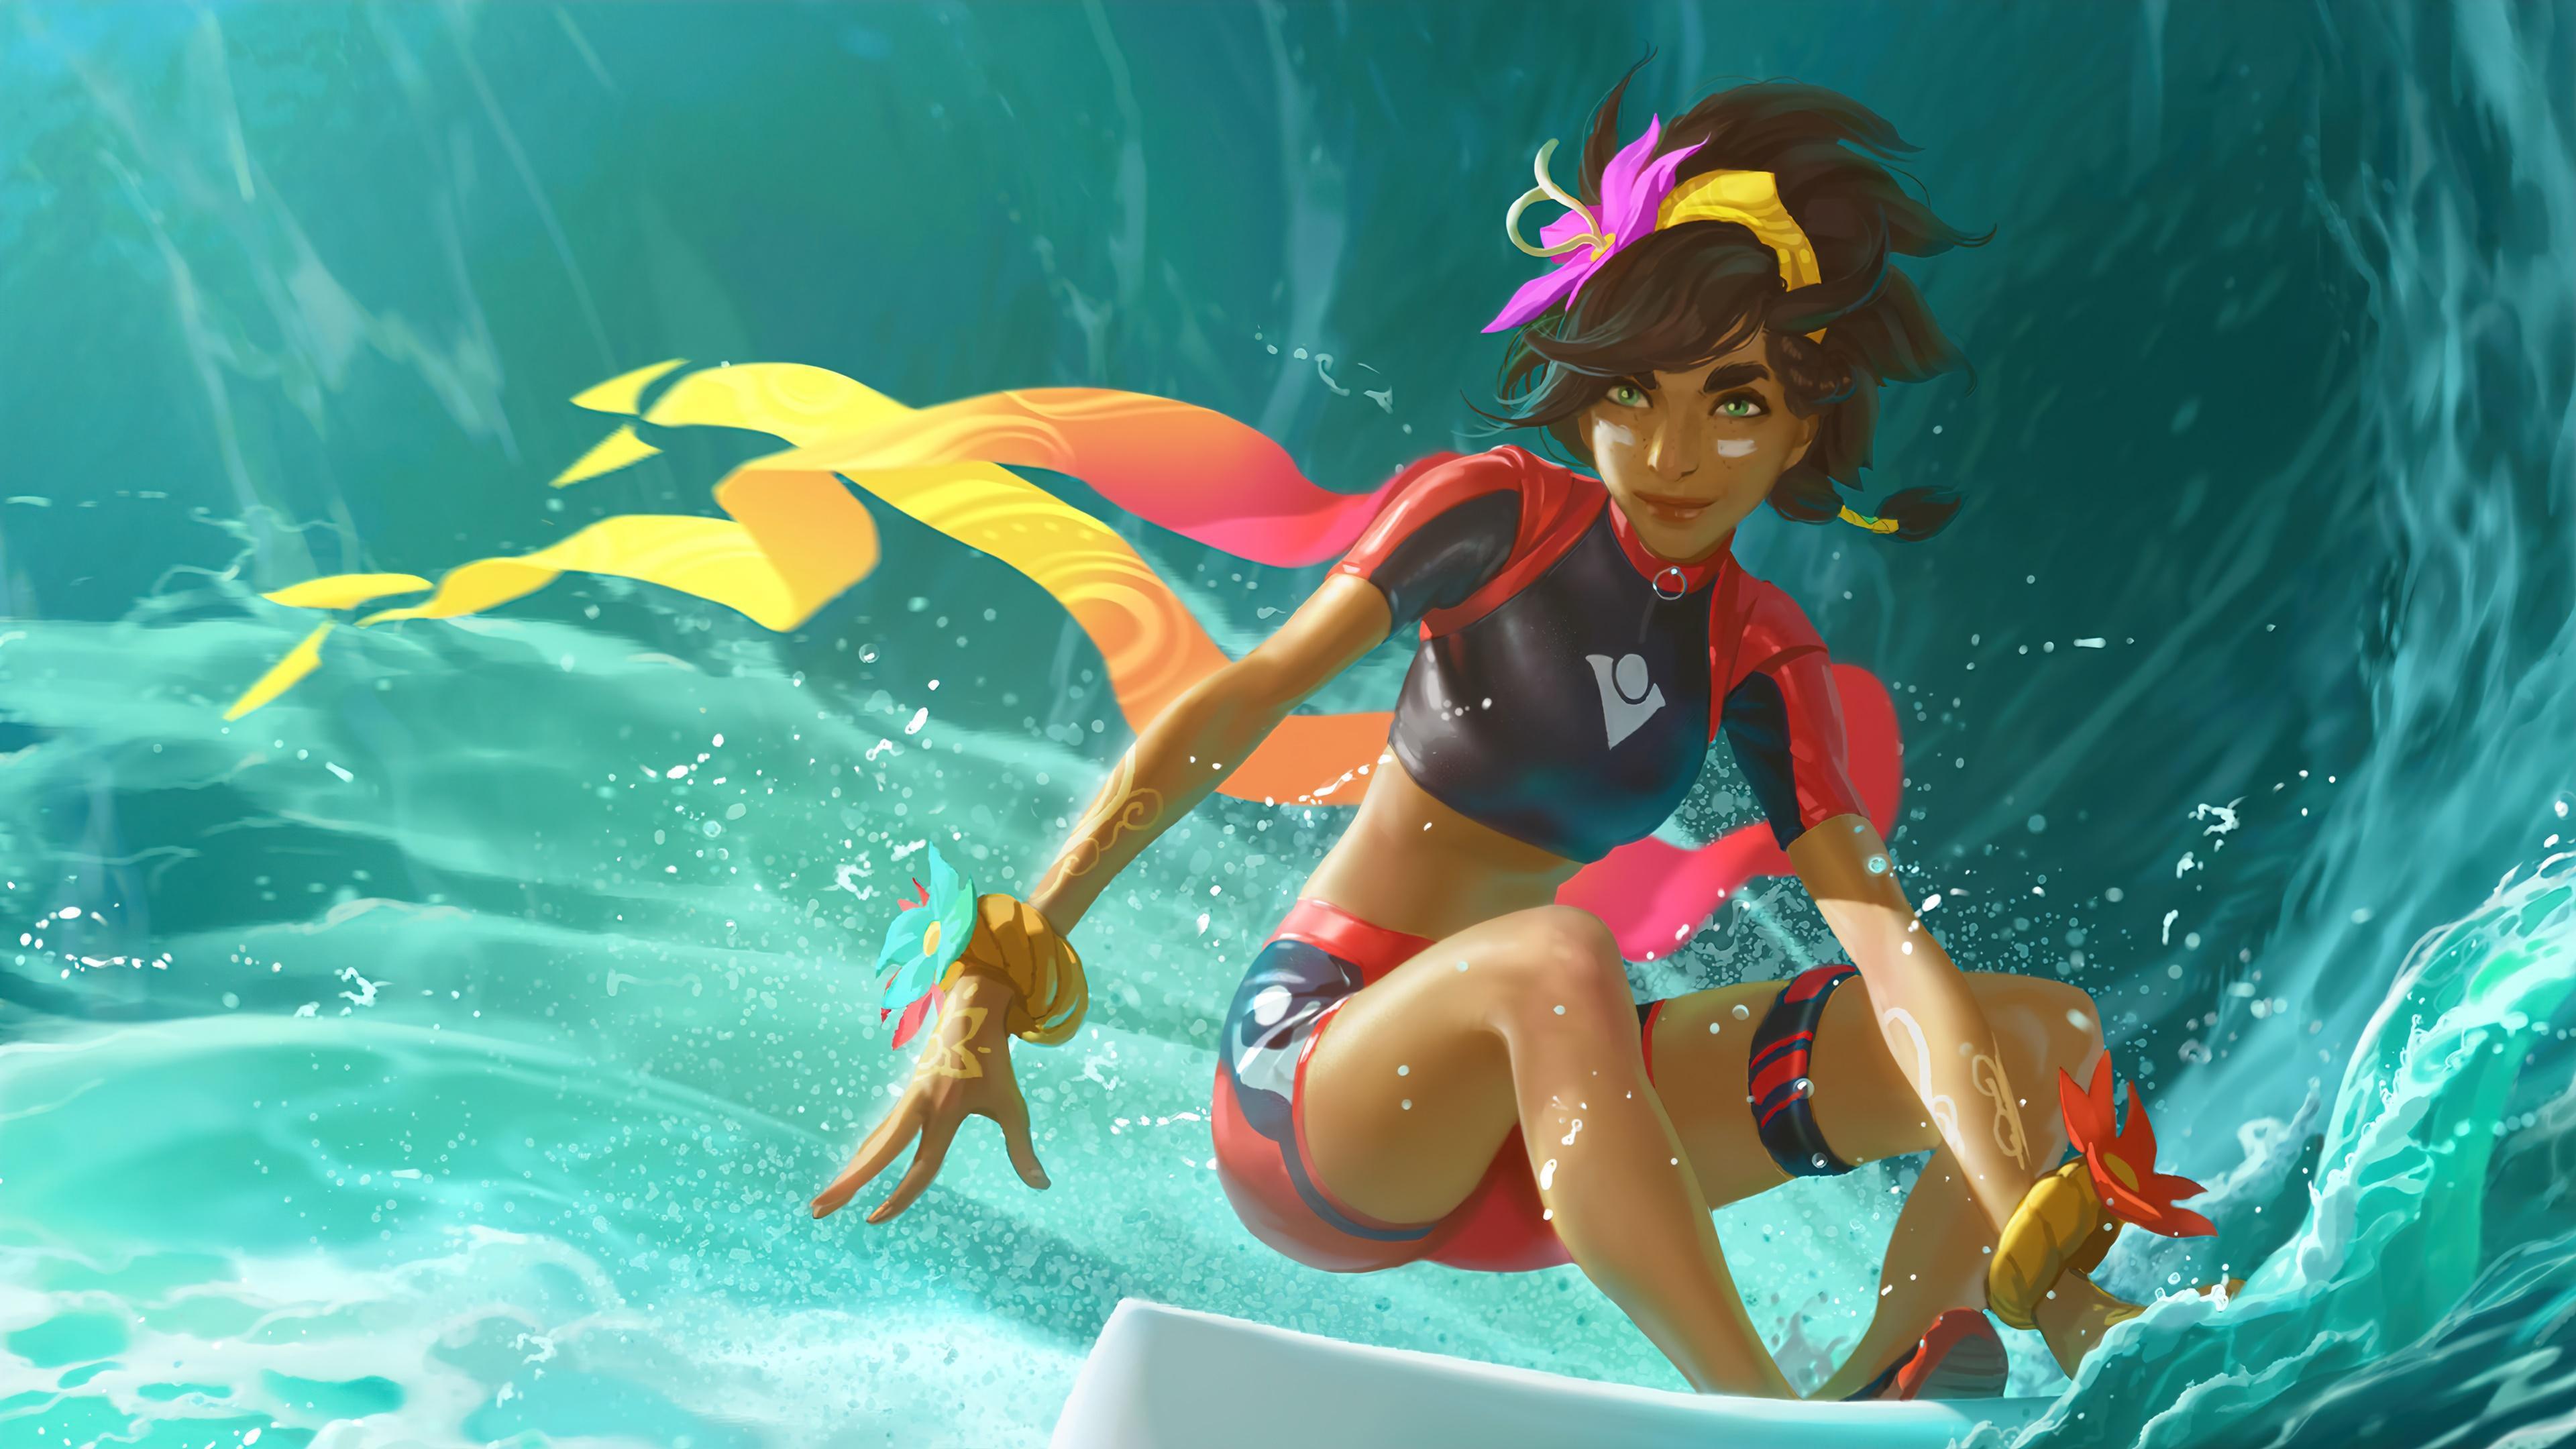 HD wallpaper, Legends Of Runeterra, Lol, Pc, Game, 4K, Taliyah, Surfing, Lor, Pool Party